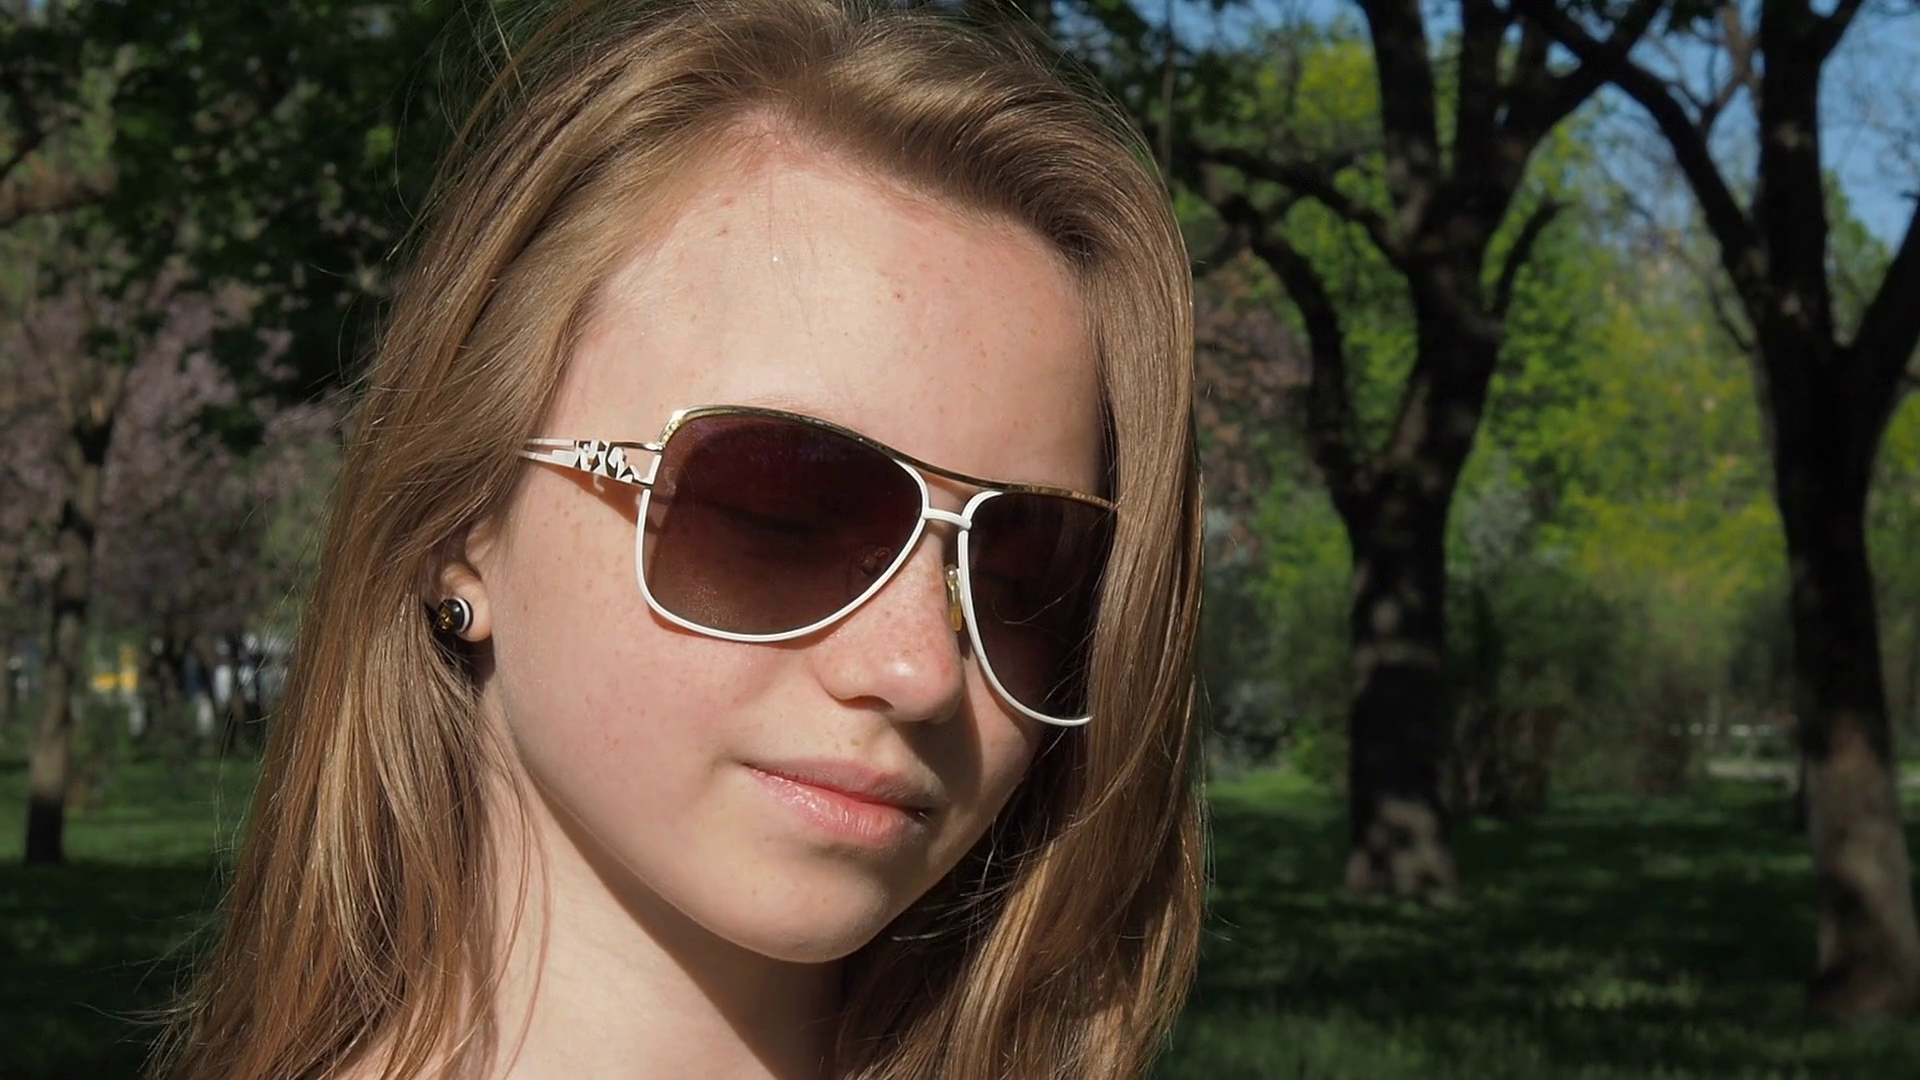 Girl in sunglasses close-up. A teenage girl with freckles takes off ...